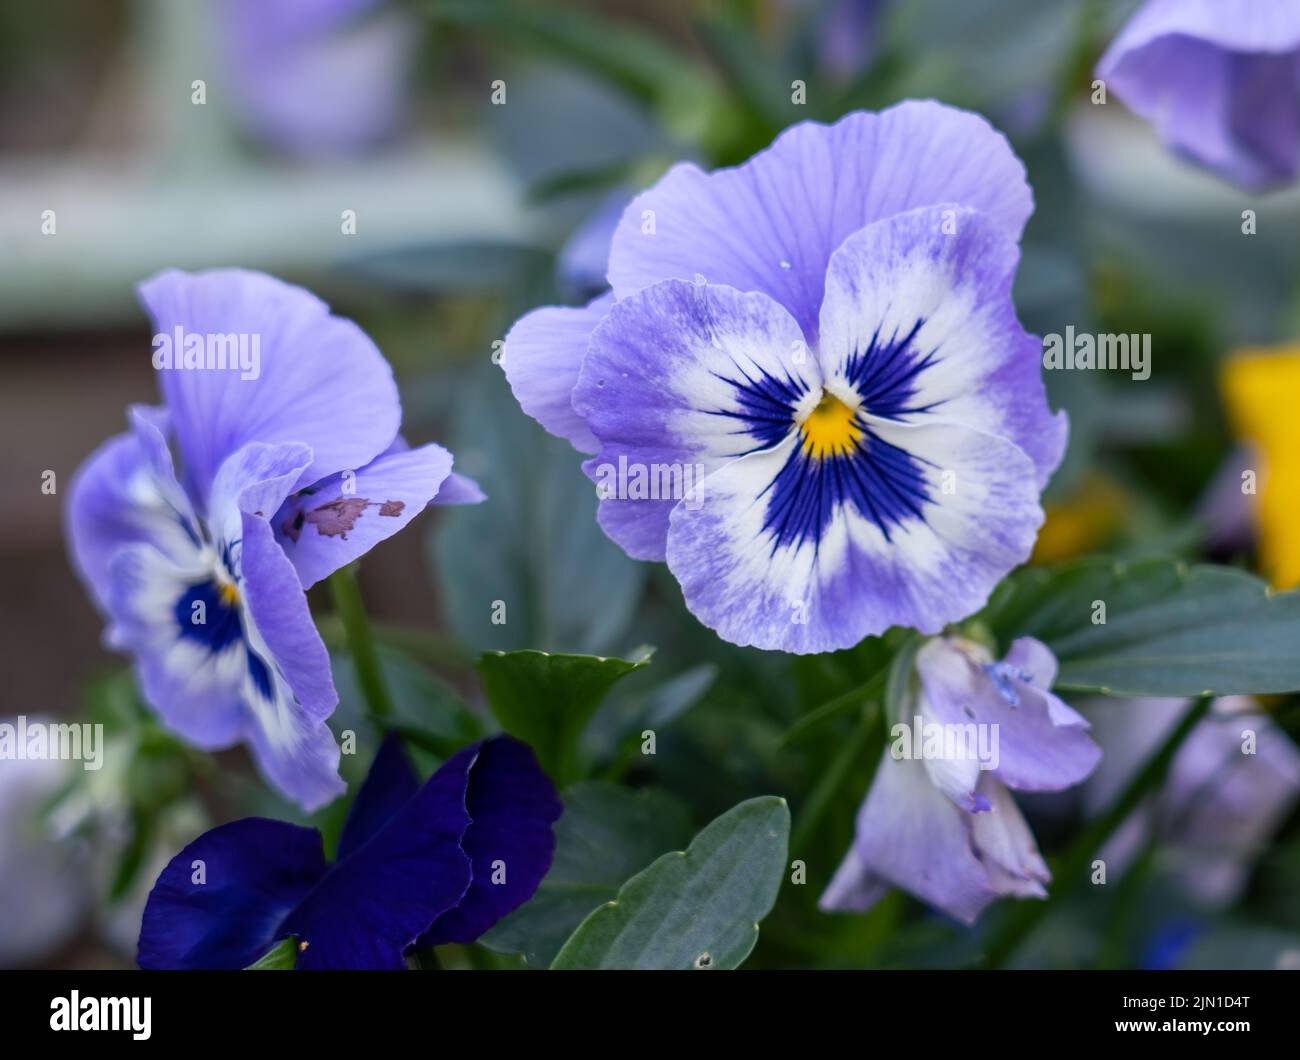 close up of beautiful colourful summer flowering Blue and White Pansies (Viola tricolor var. hortensis) Stock Photo